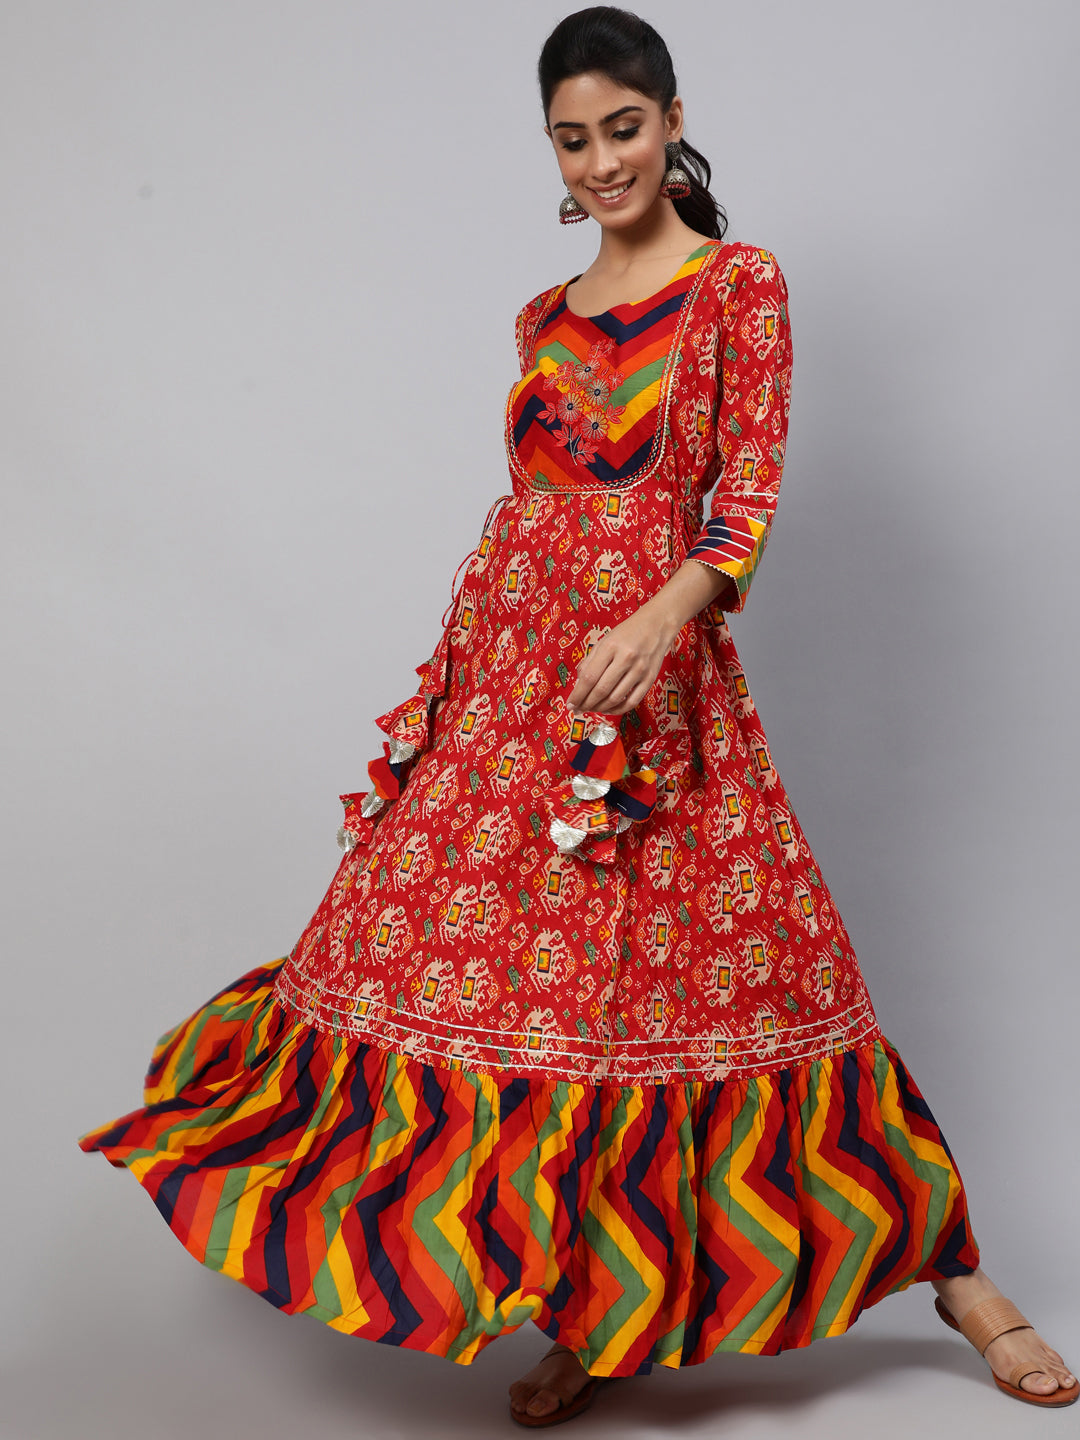 Women's Red Maxi Dress With Embroidered Yoke - Aks